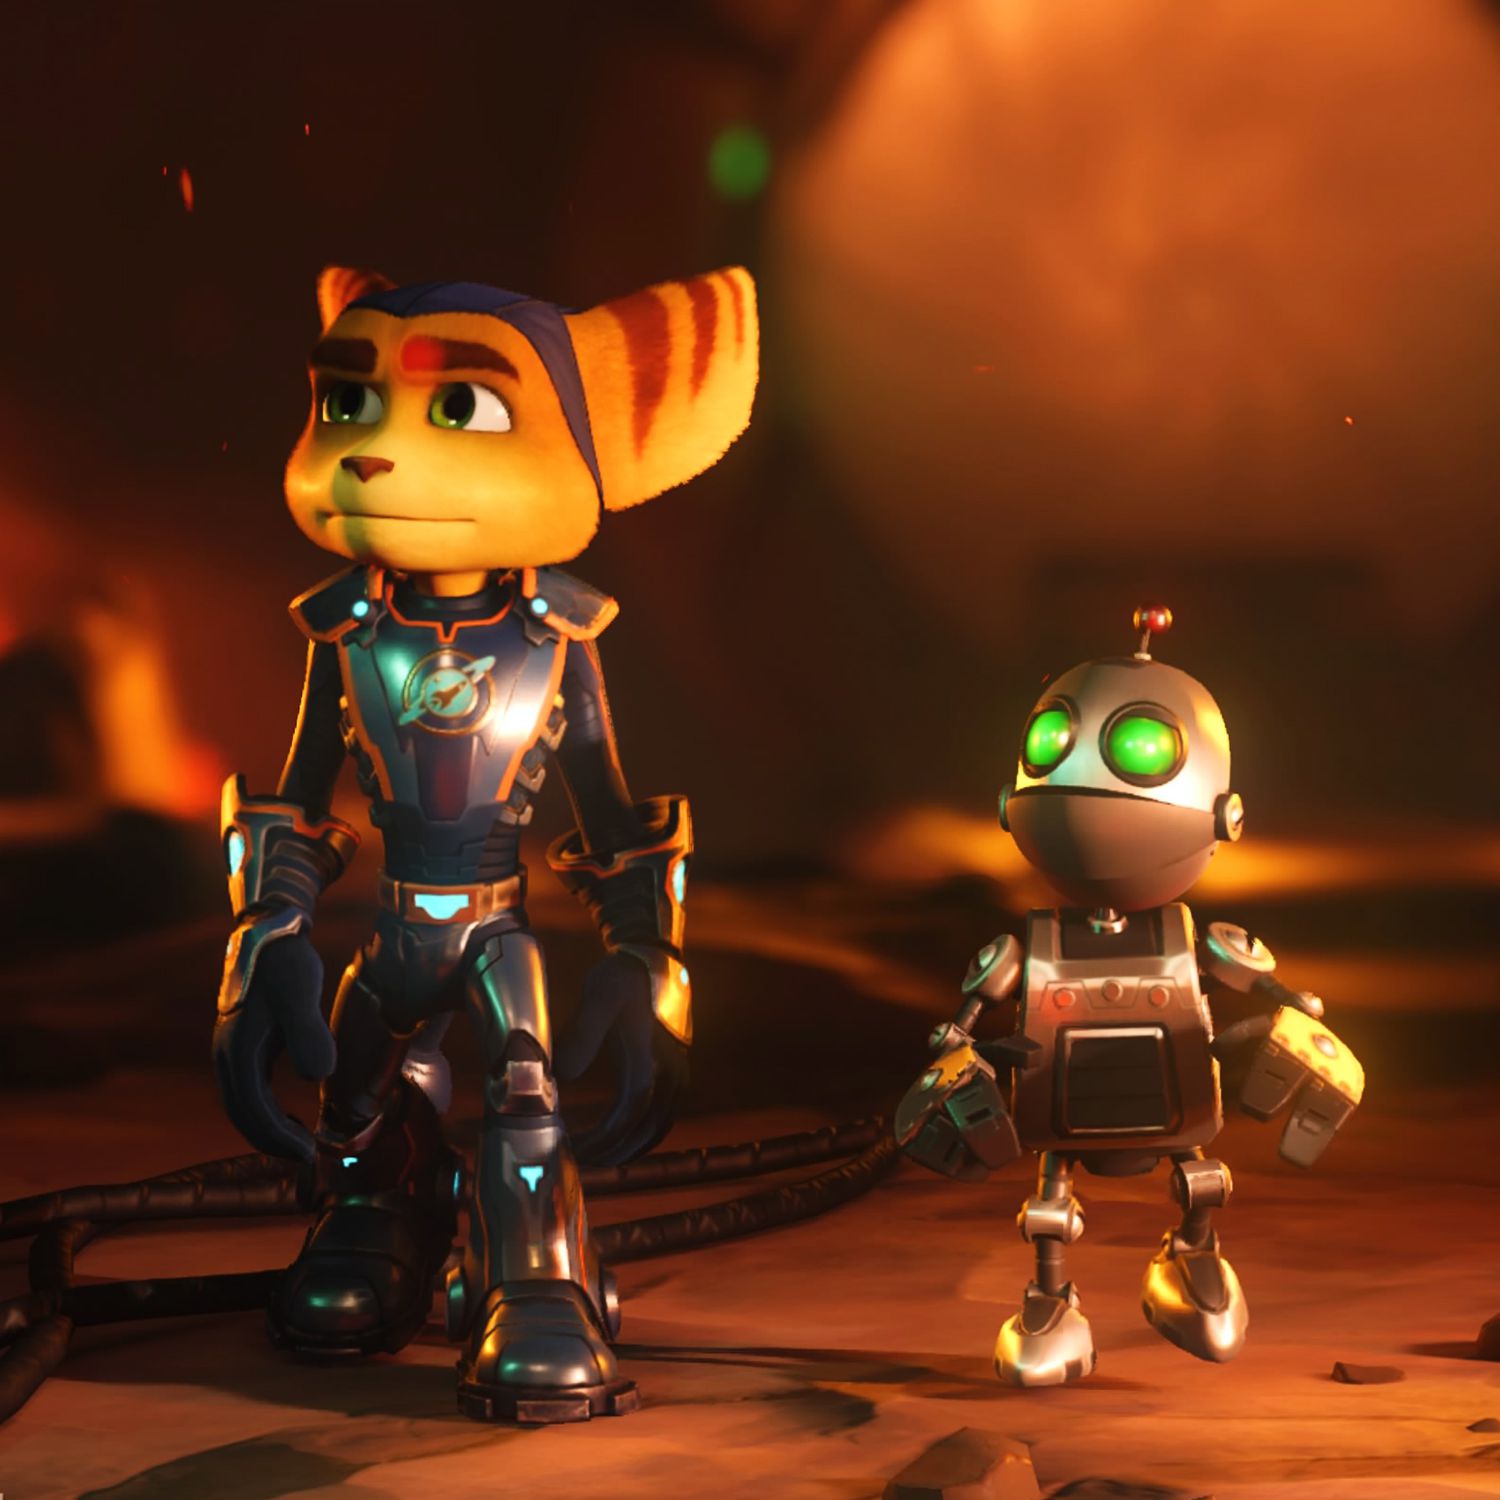 hero SQ Ratchet and Clank Playstation 4 Video Game 1 9f15662dc6e442d08e671b05f33004e0